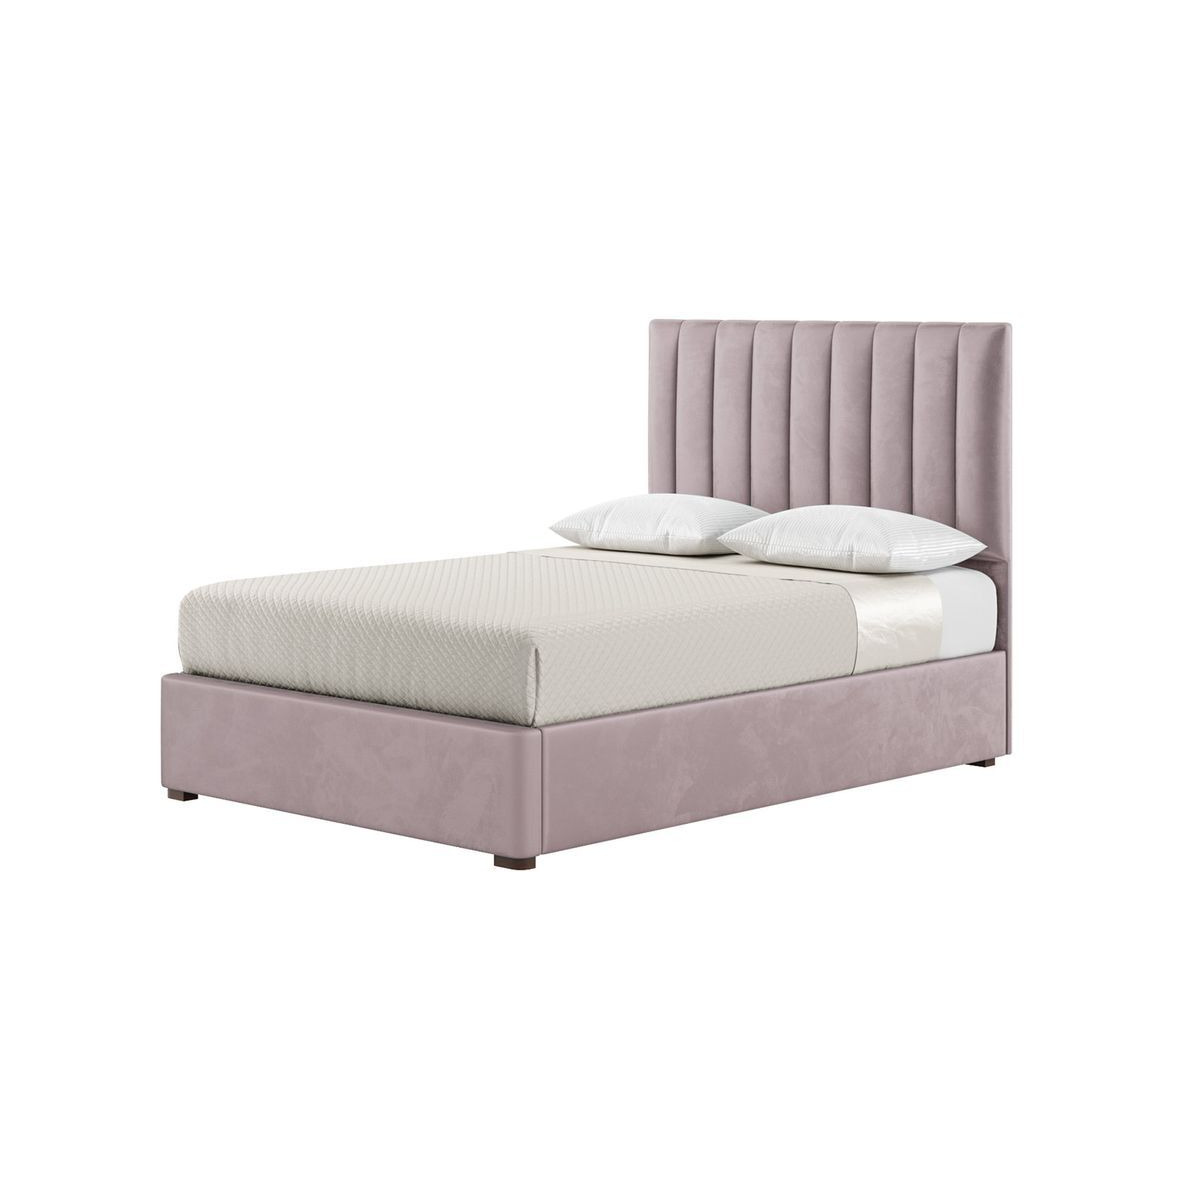 Naomi 4ft6 Double Bed Frame With Fluted Vertical Stitch Headboard, lilac, Leg colour: dark oak - image 1